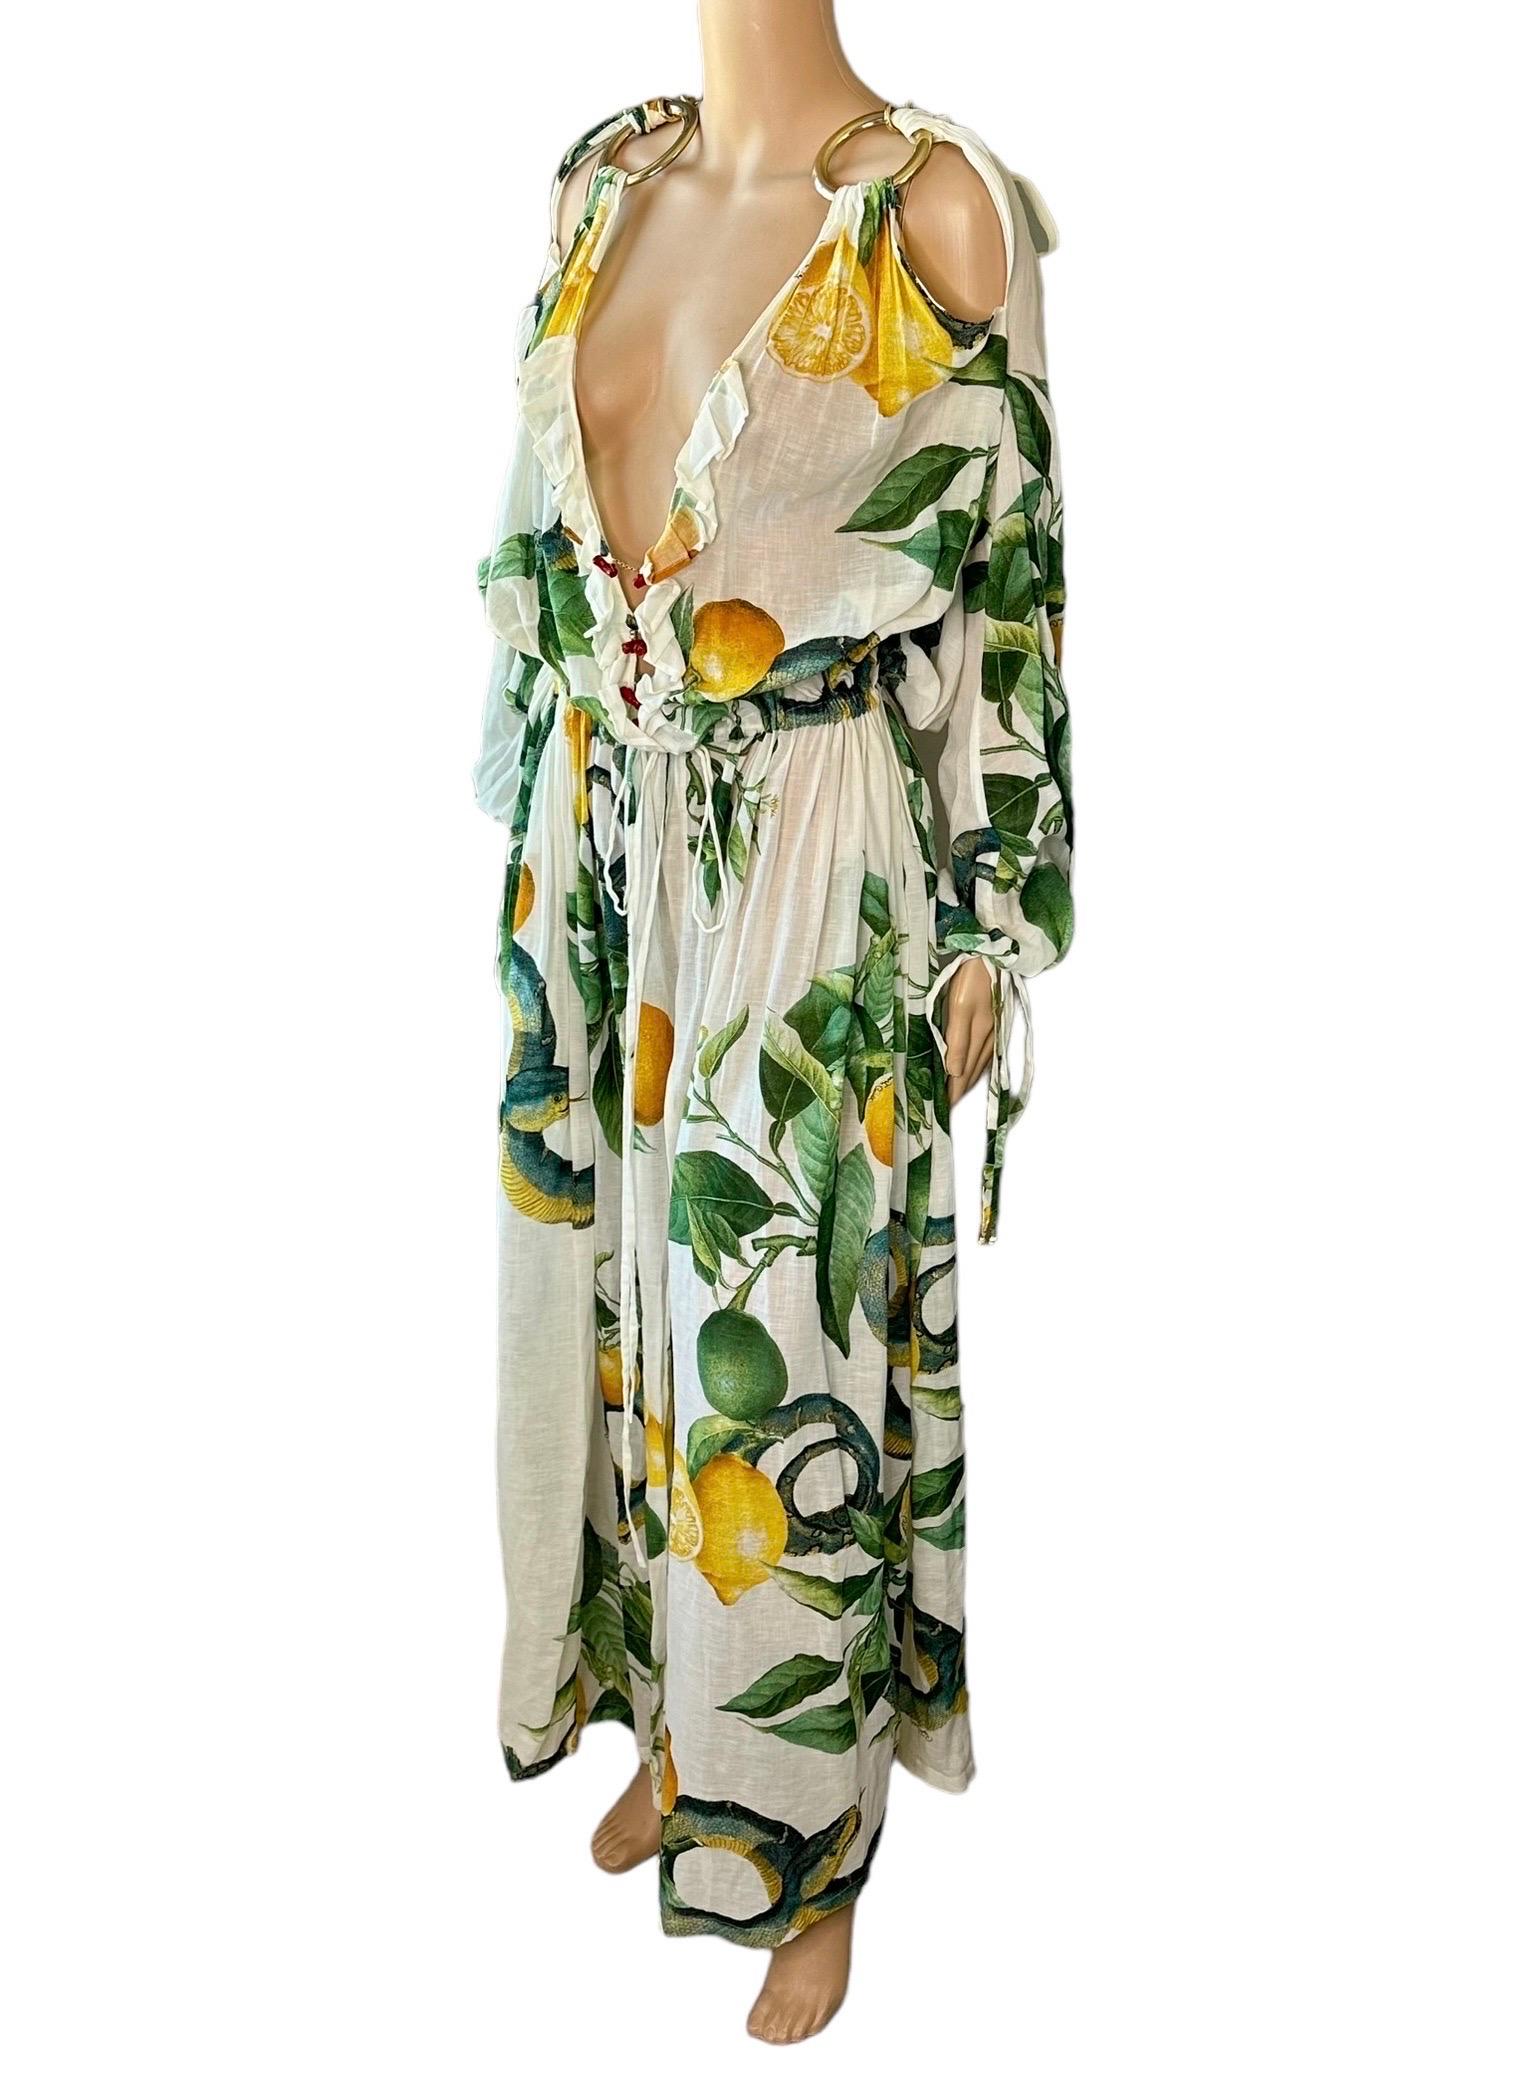 Roberto Cavalli S/S 2005 Runway Chain Cutout Plunging Neckline Maxi Dress In Good Condition For Sale In Naples, FL